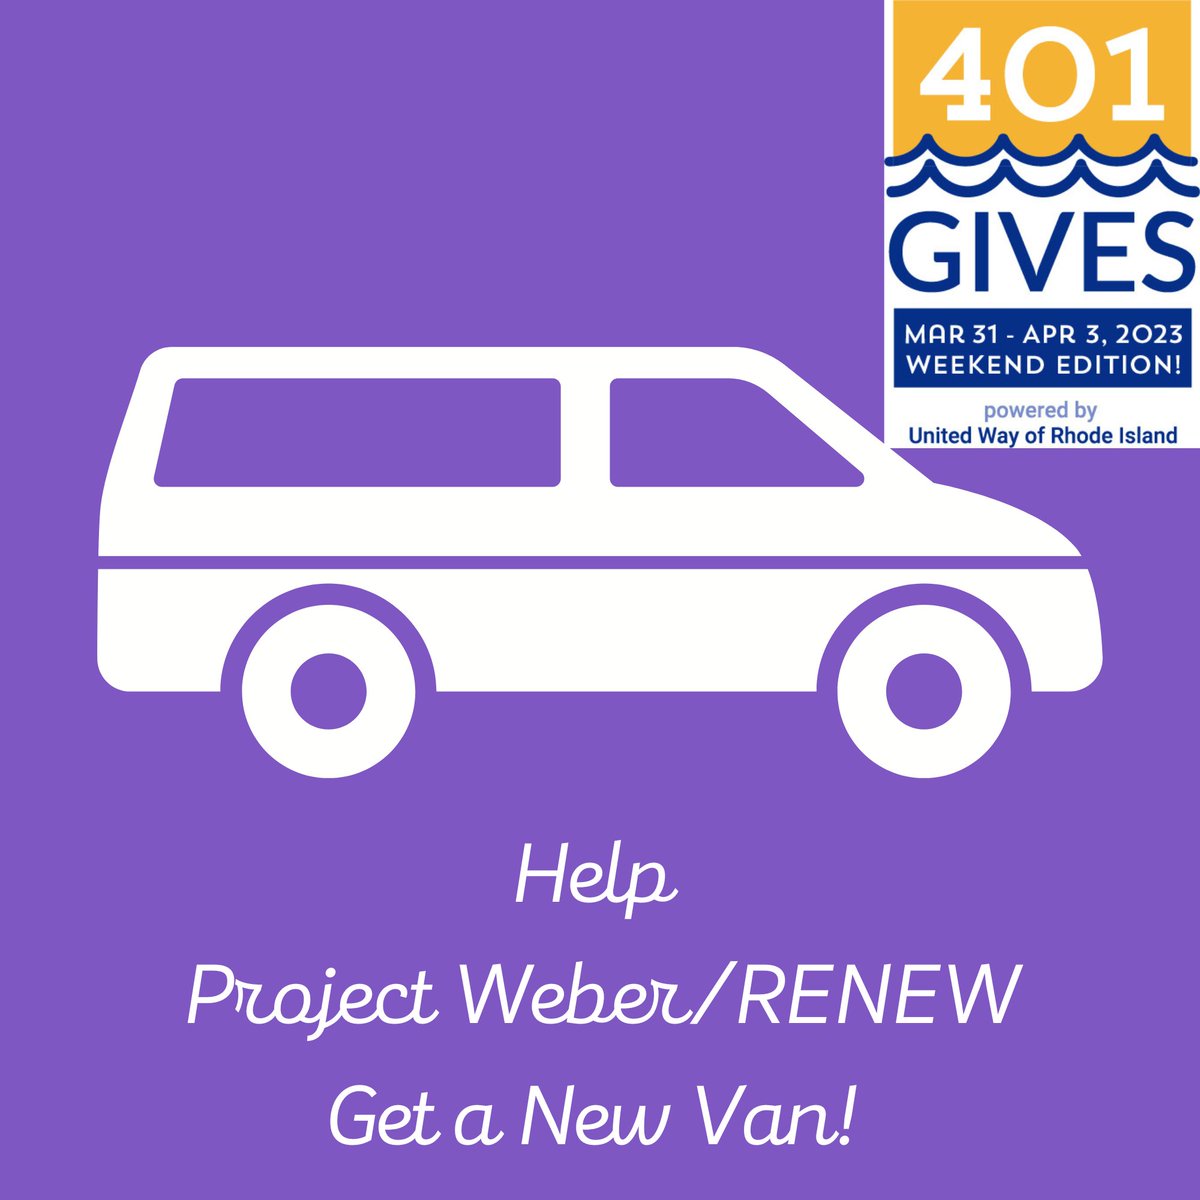 If you're in RI, we know you have lots of 401 Gives stuff coming at you.😉But we'd also love if you think of us tomorrow as we try to raise $10K for a new outreach van! No matter which org you support tomorrow, you're helping many folks. 💜 401gives.org/organizations/…